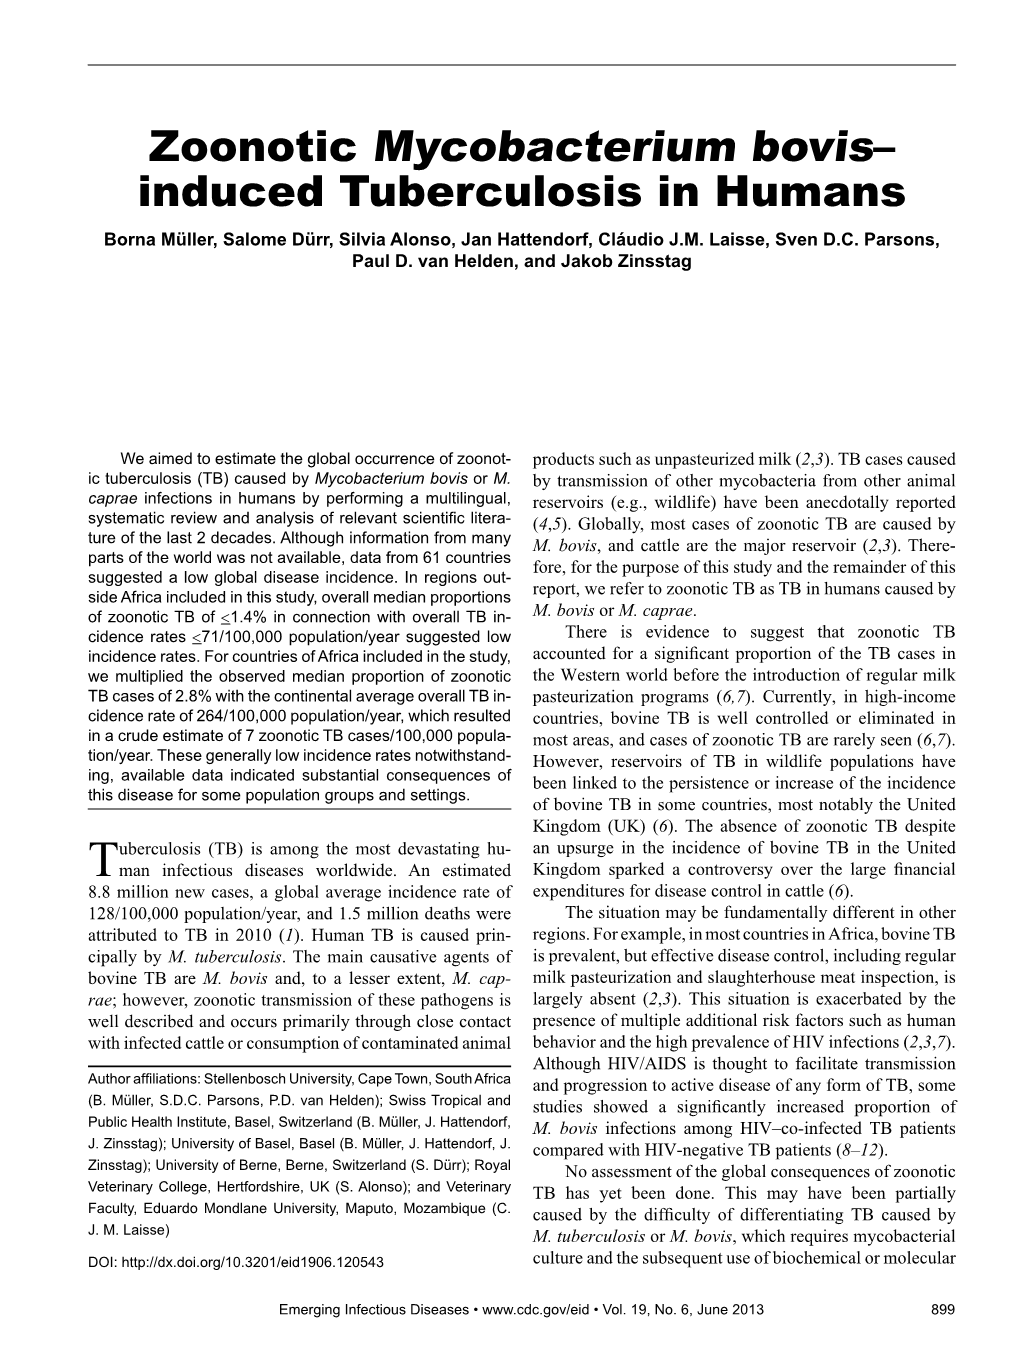 Zoonotic Mycobacterium Bovis–Induced Tuberculosis in Humans